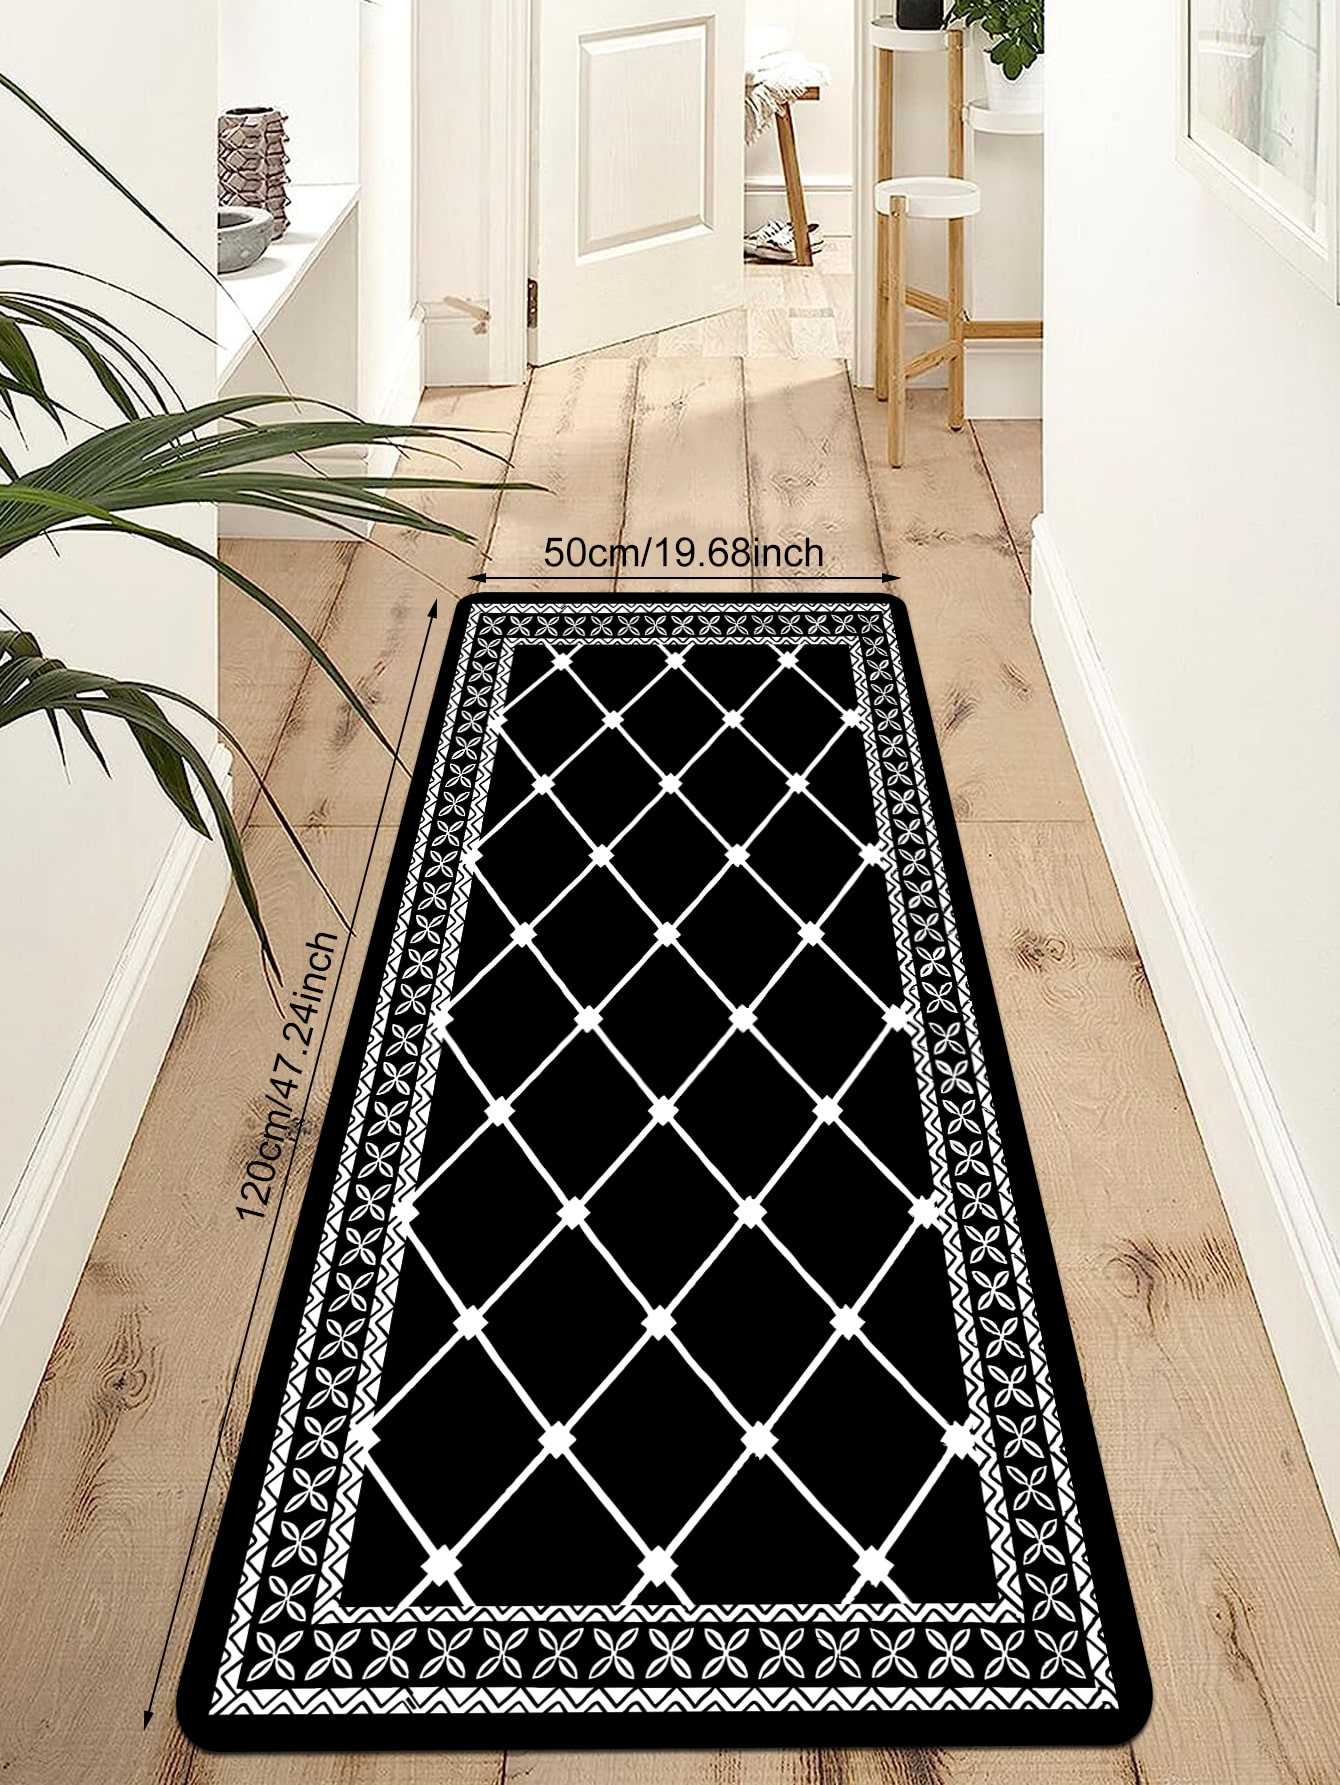 Ileading Kitchen Mats for Floor 3 Piece Set Washable Kitchen Rugs and Mats  Sets Non Slip Laundry Room Runner Rug Black Kitchen Area Rug Carpet for